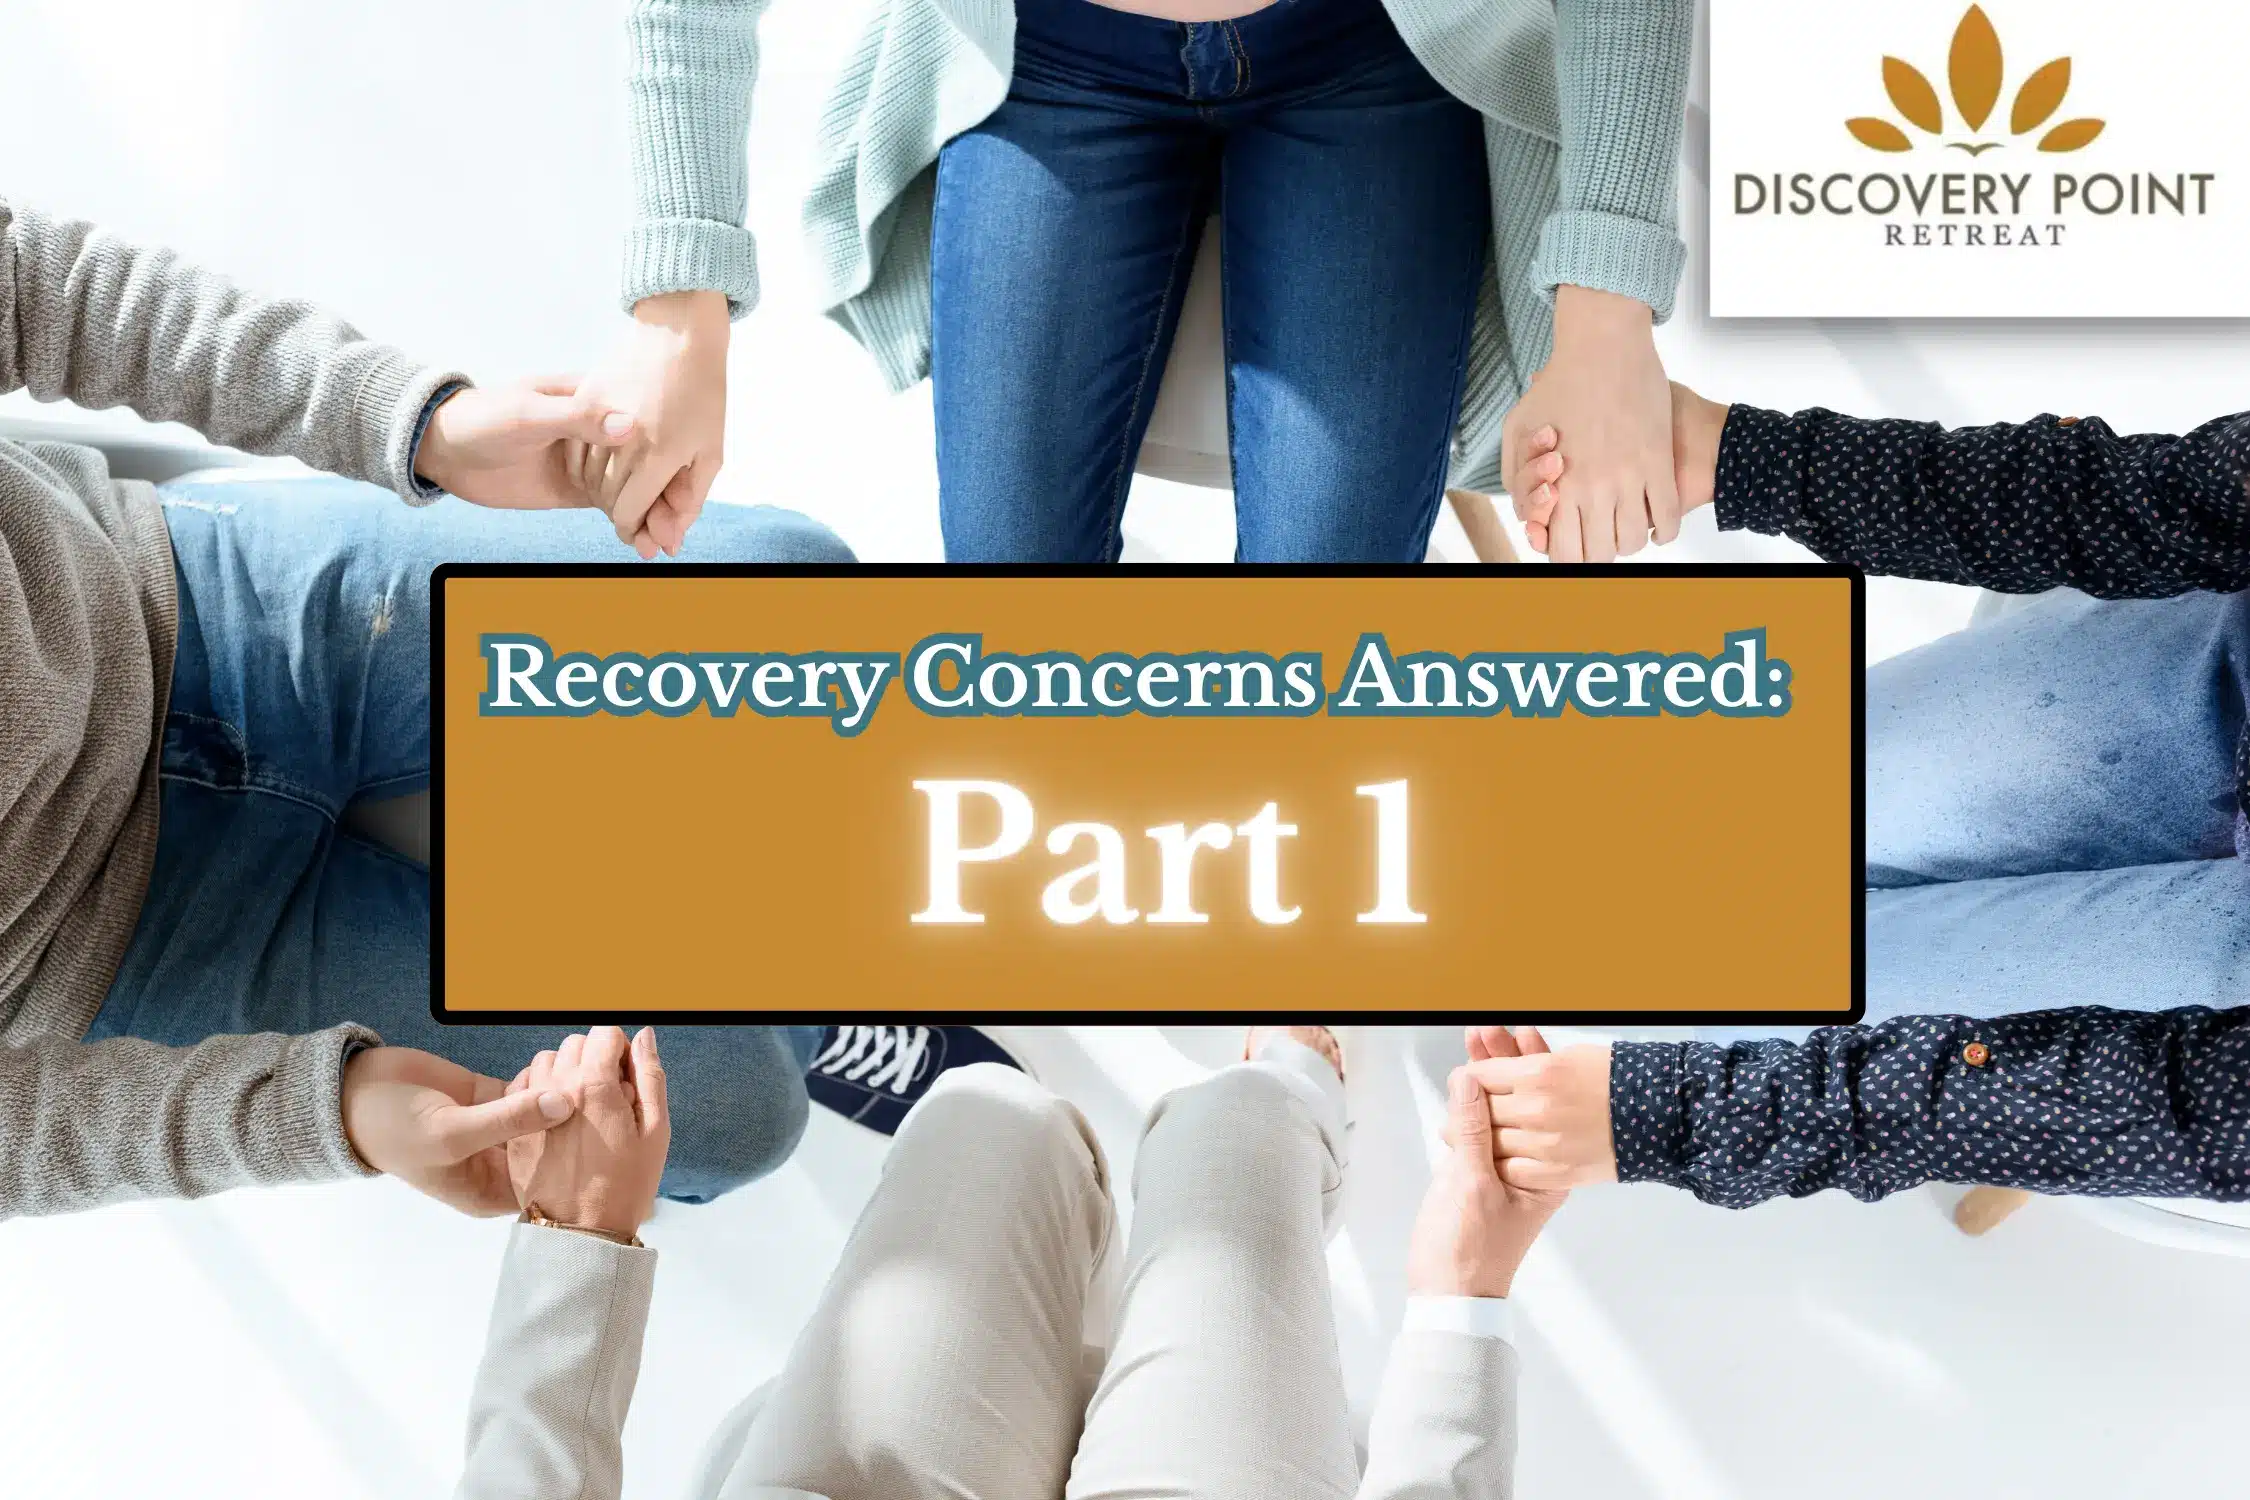 Recovery questions answered